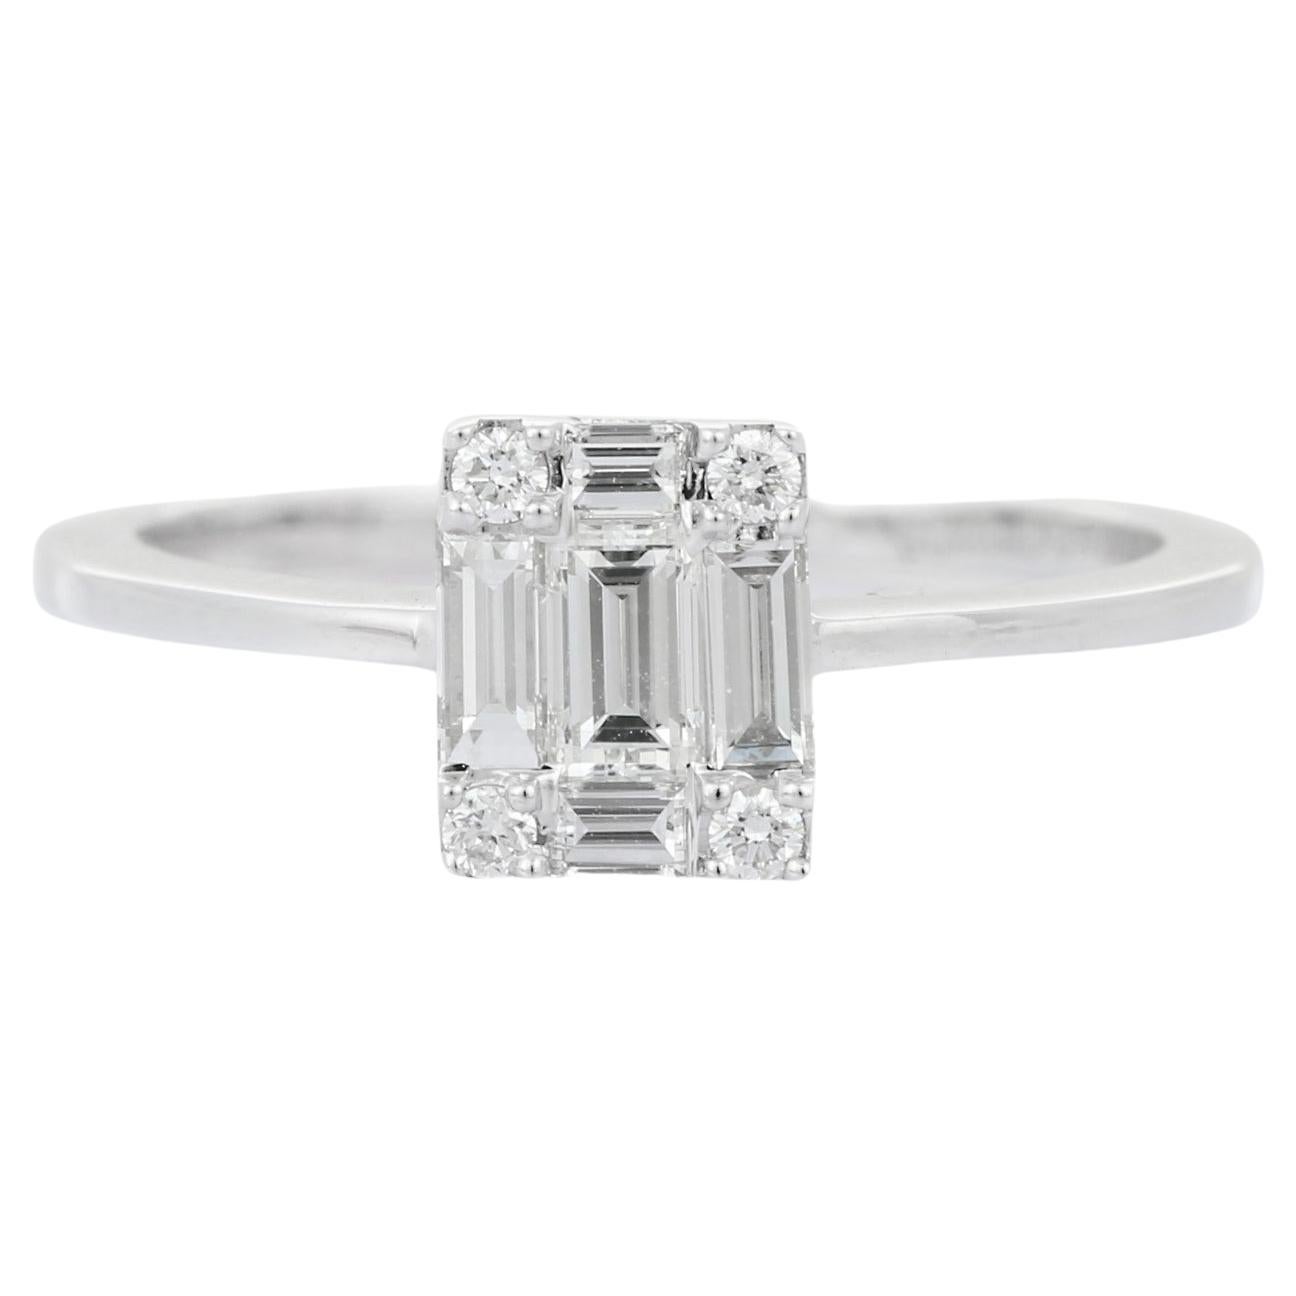 For Sale:  Diamond Cluster Solitaire Ring in 18 Karat White Gold